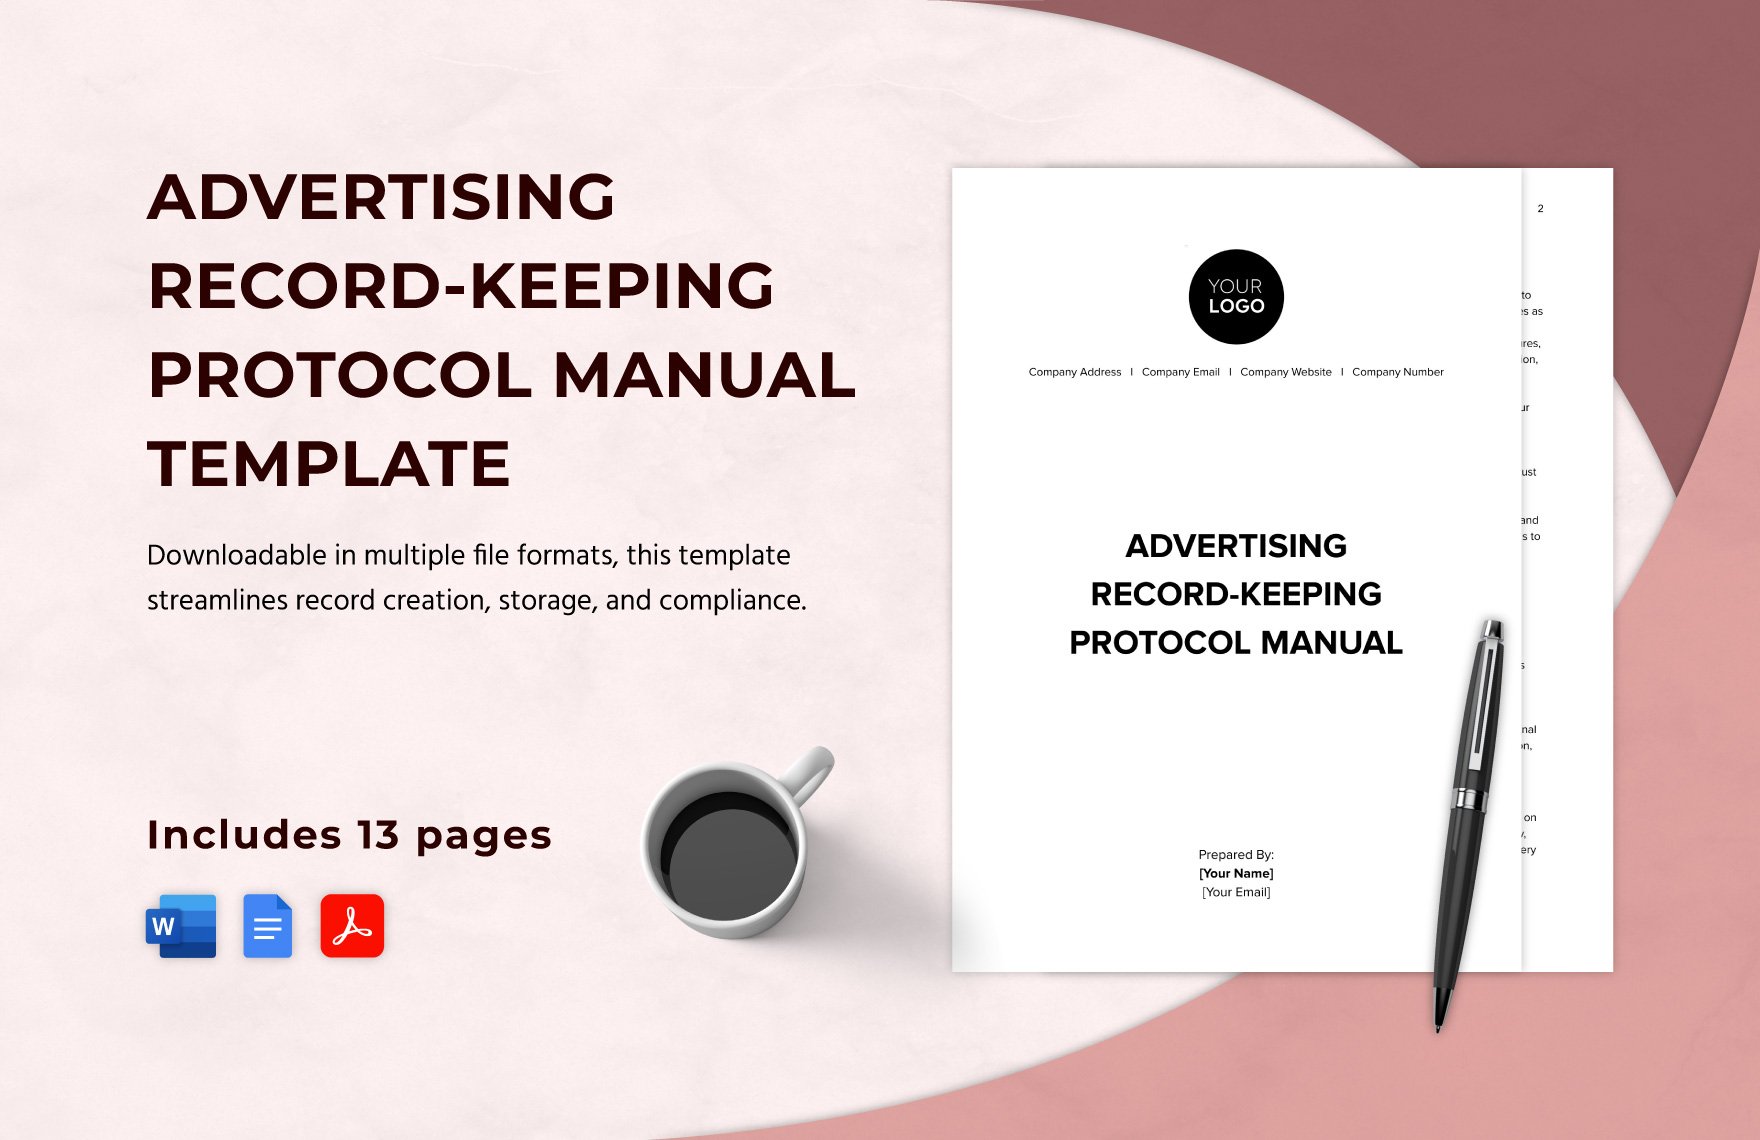 Advertising Record-Keeping Protocol Manual Template